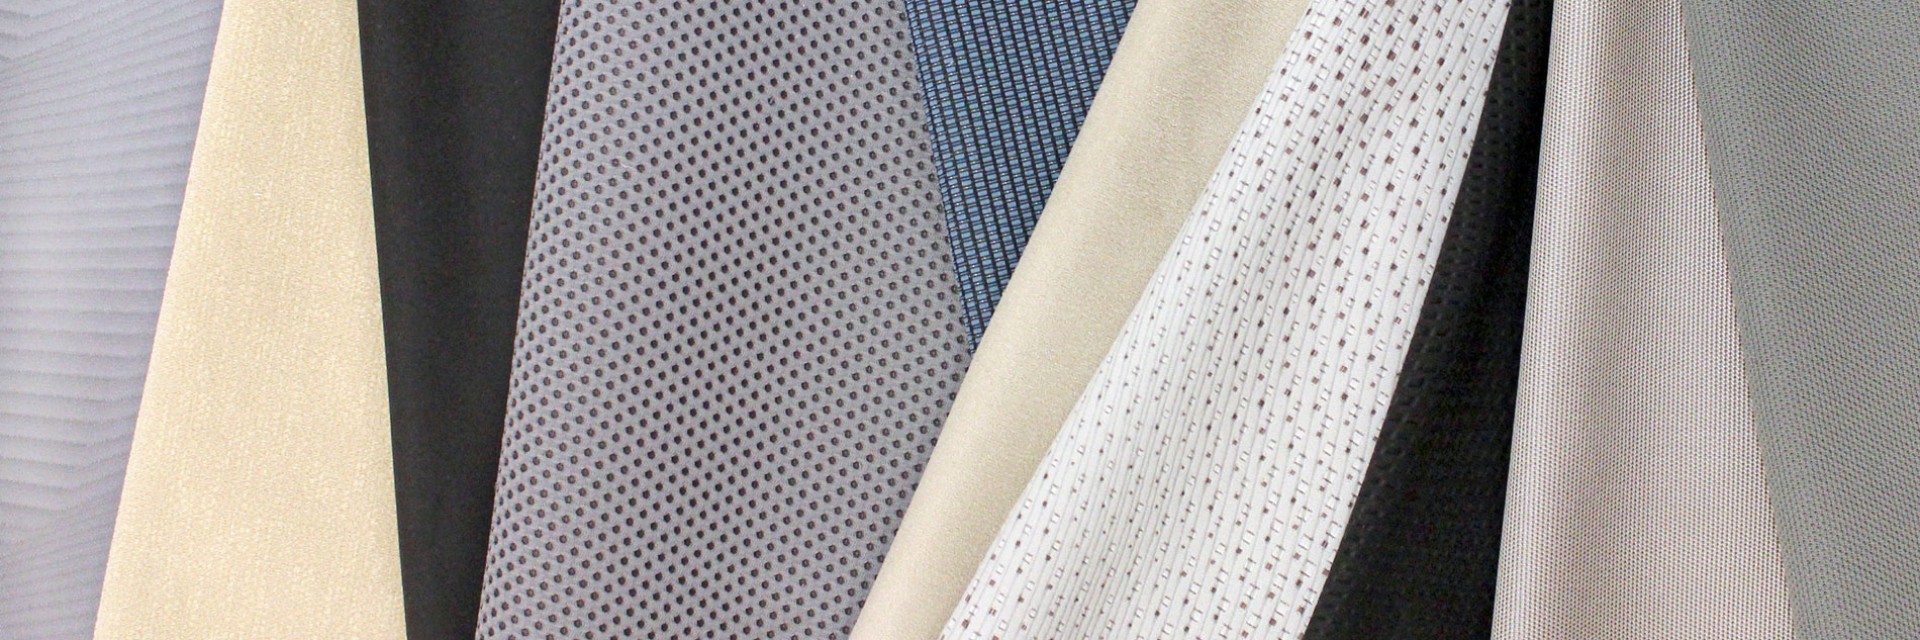 High Quality Woven-Knitted Automotive Fabrics